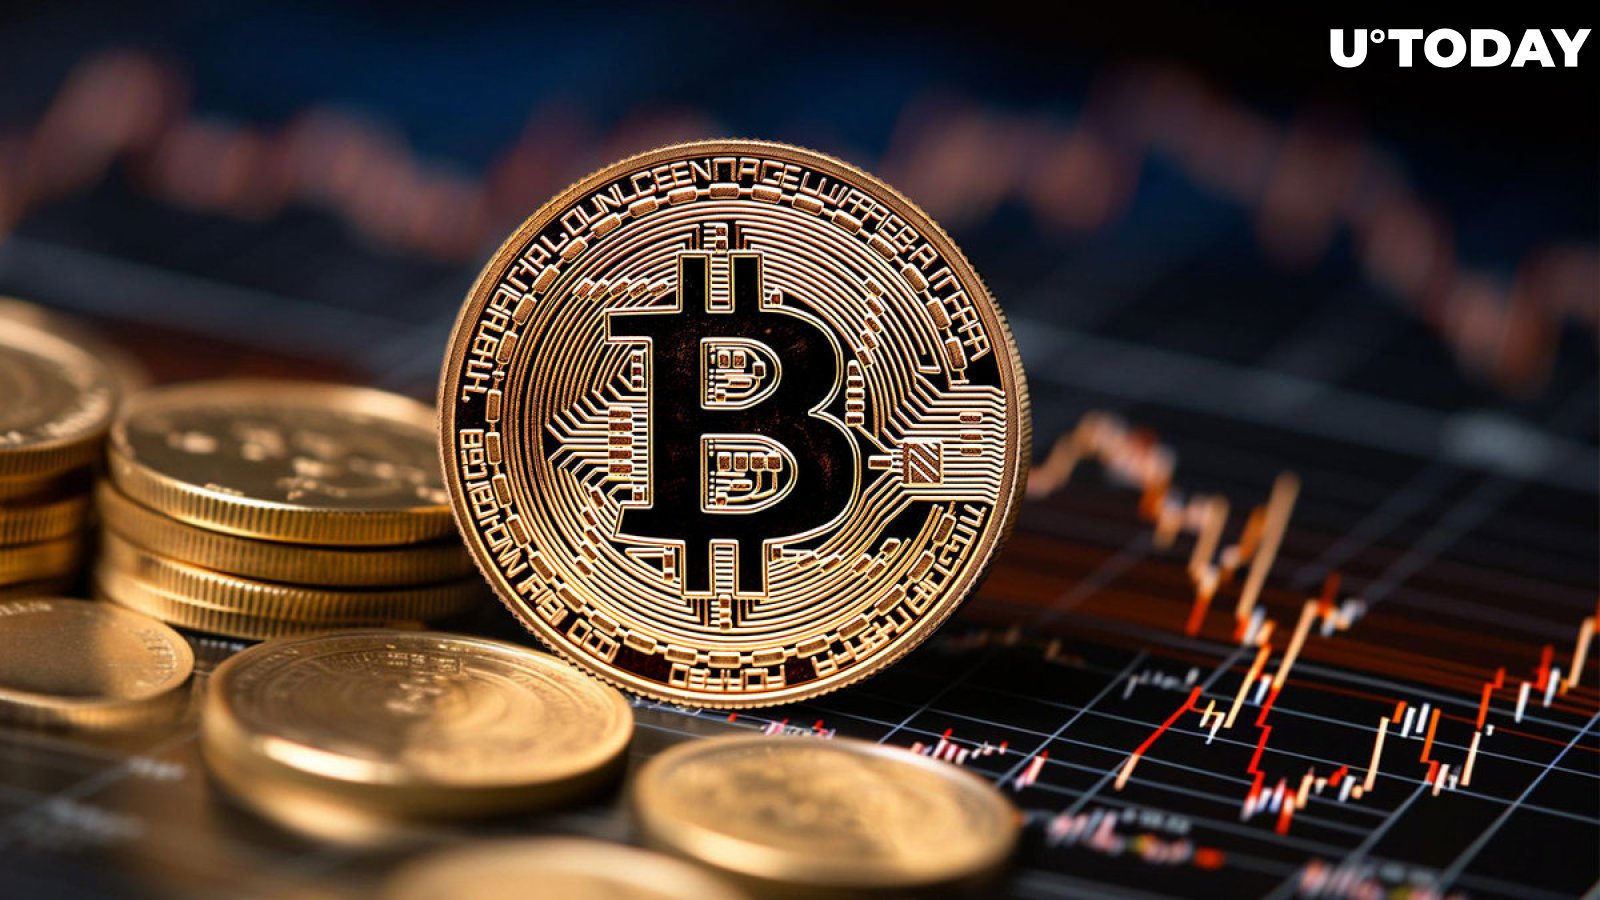 Don't Panic, Bitcoin (BTC) Price Can't Fall Below This Level: Analyst